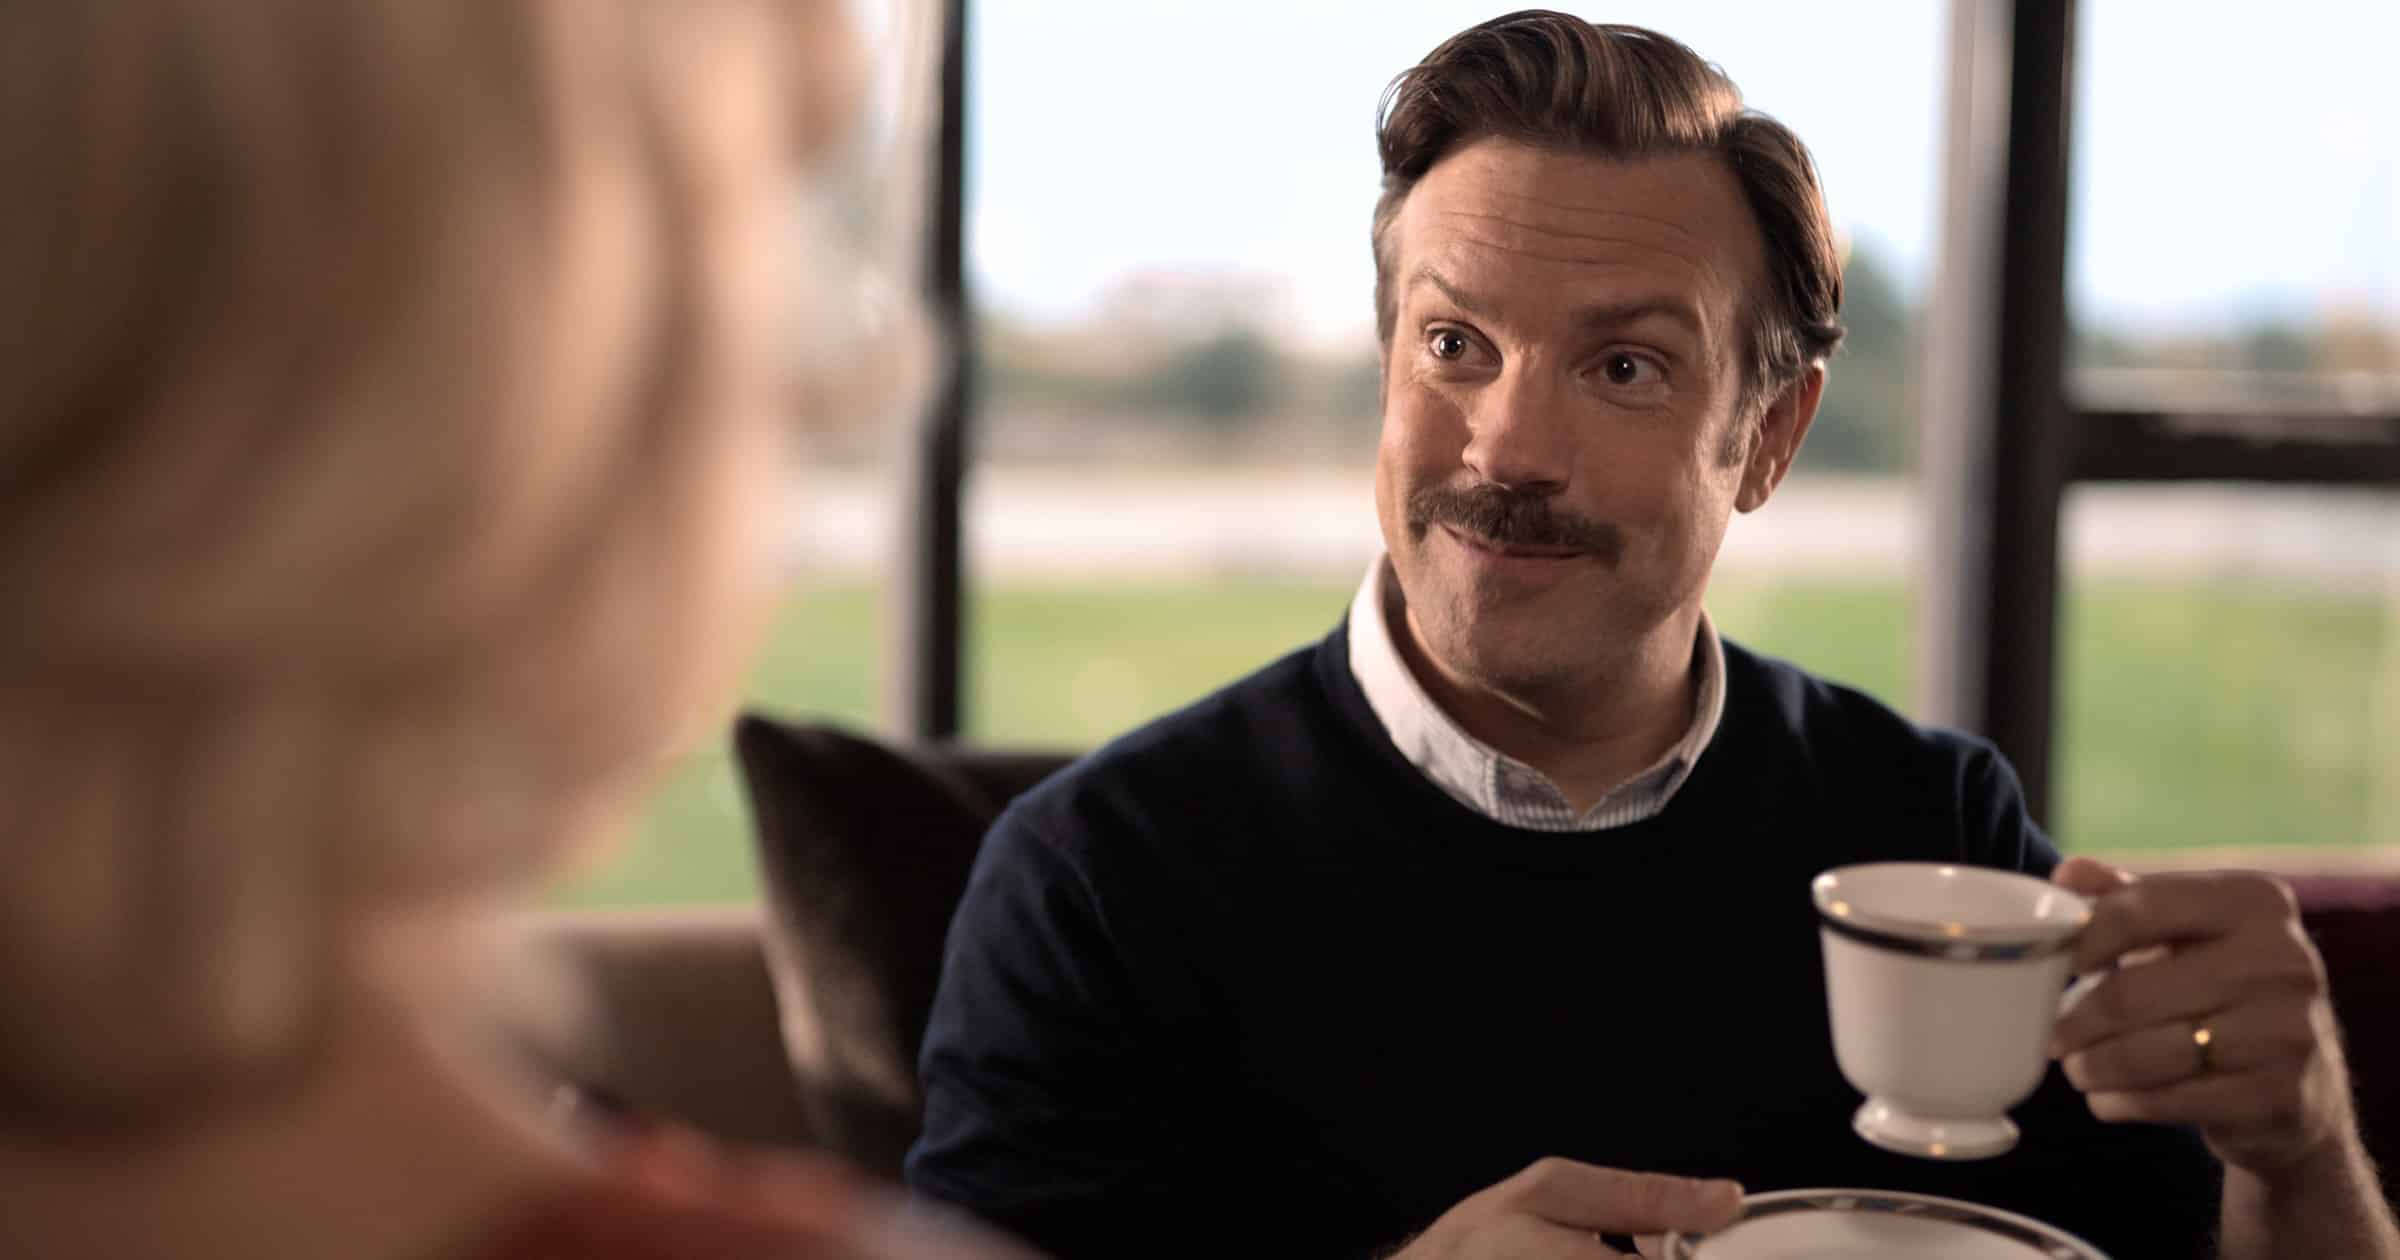 [Updated]Jason Sudeikis Earns SAG Awards 2021 Win for ‘Ted Lasso’ Performance